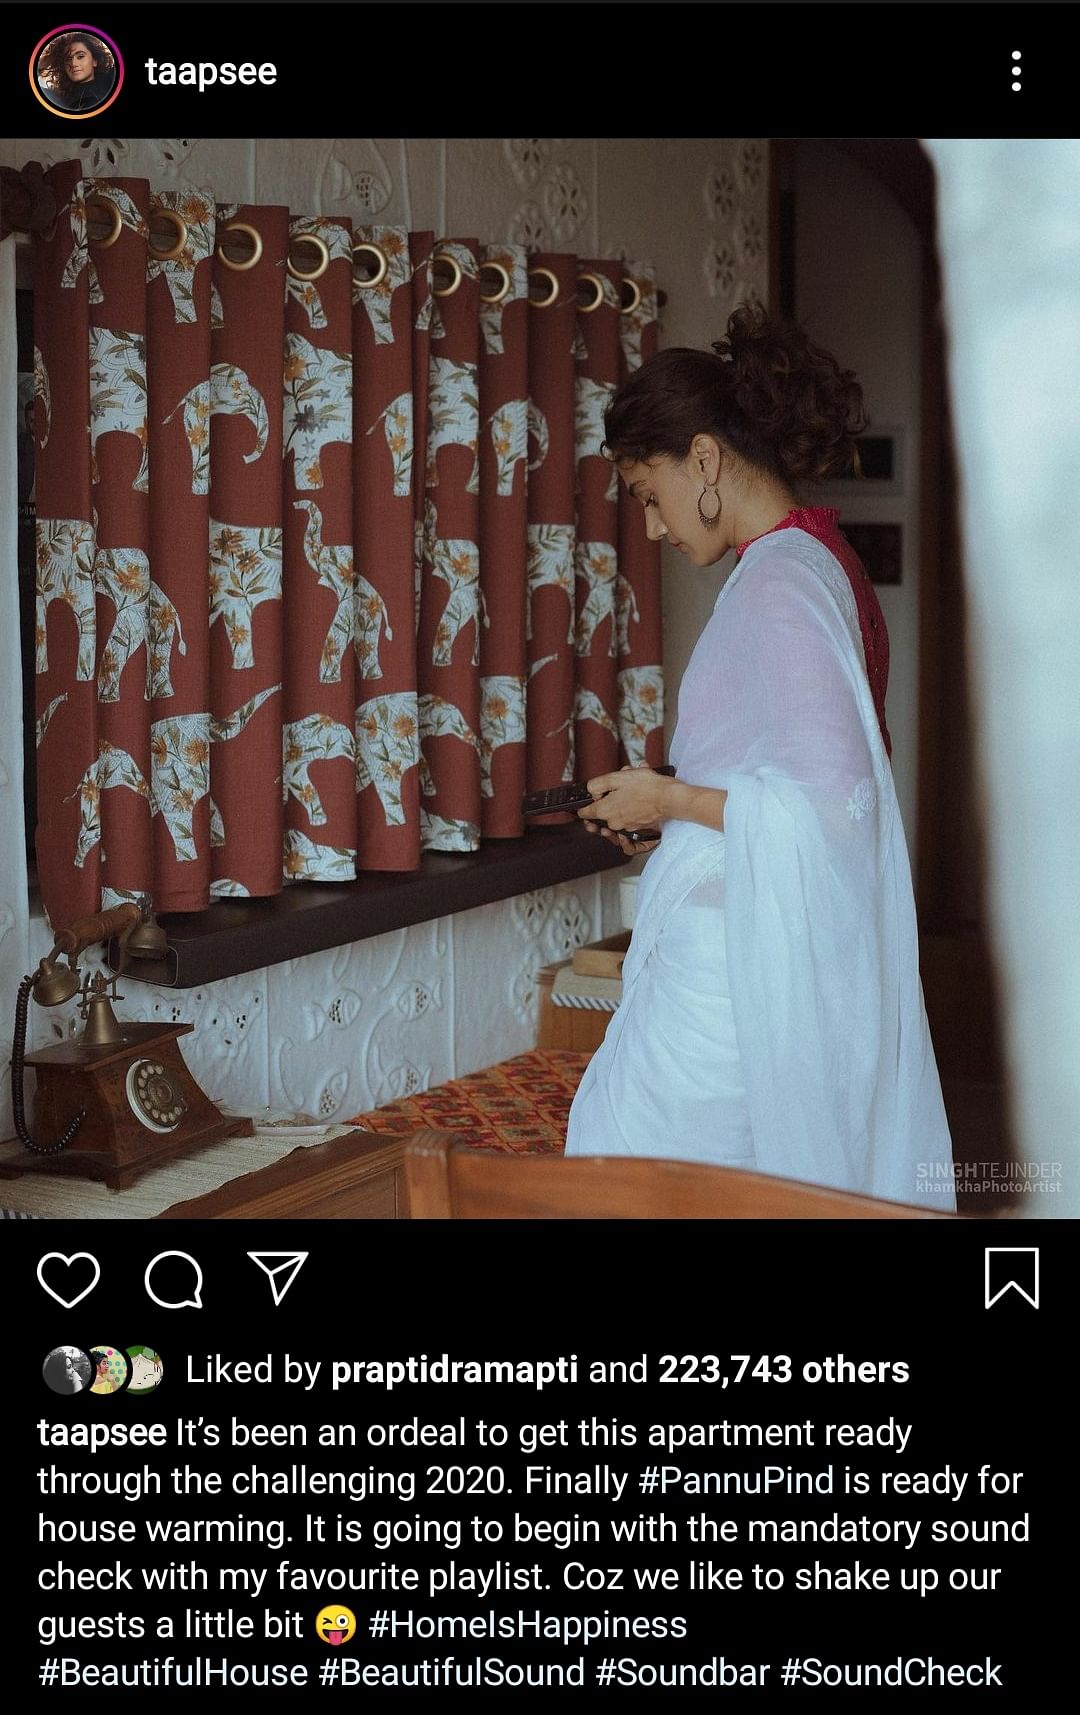 She shared a picture on Instagram of a 'sound check' for her guests.